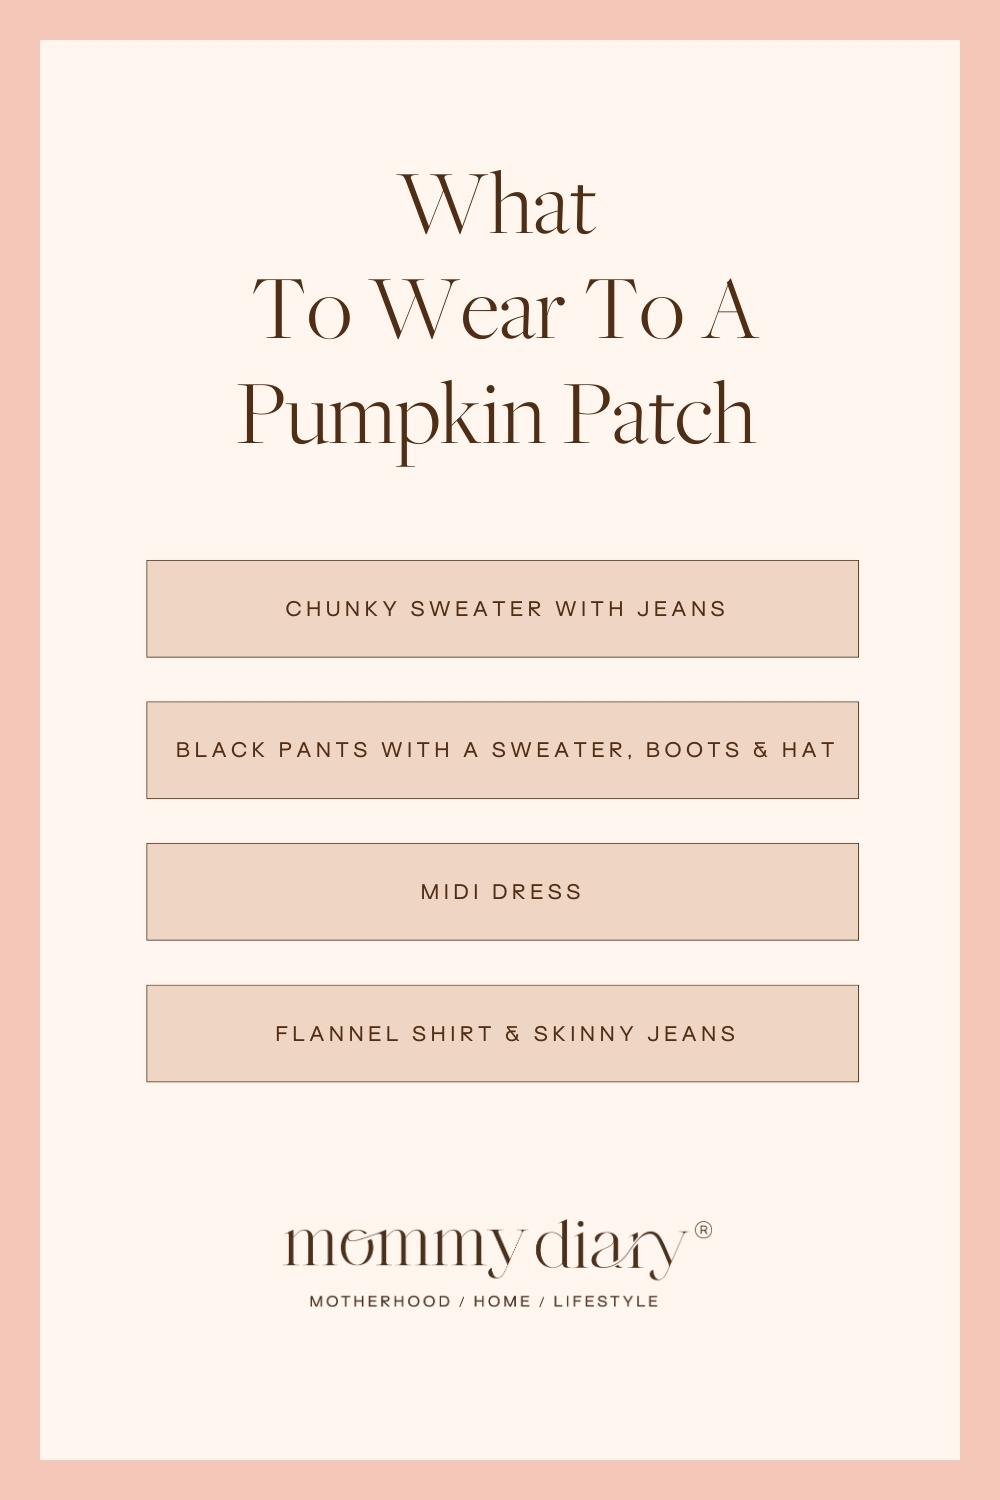 What To Wear To A Pumpkin Patch List